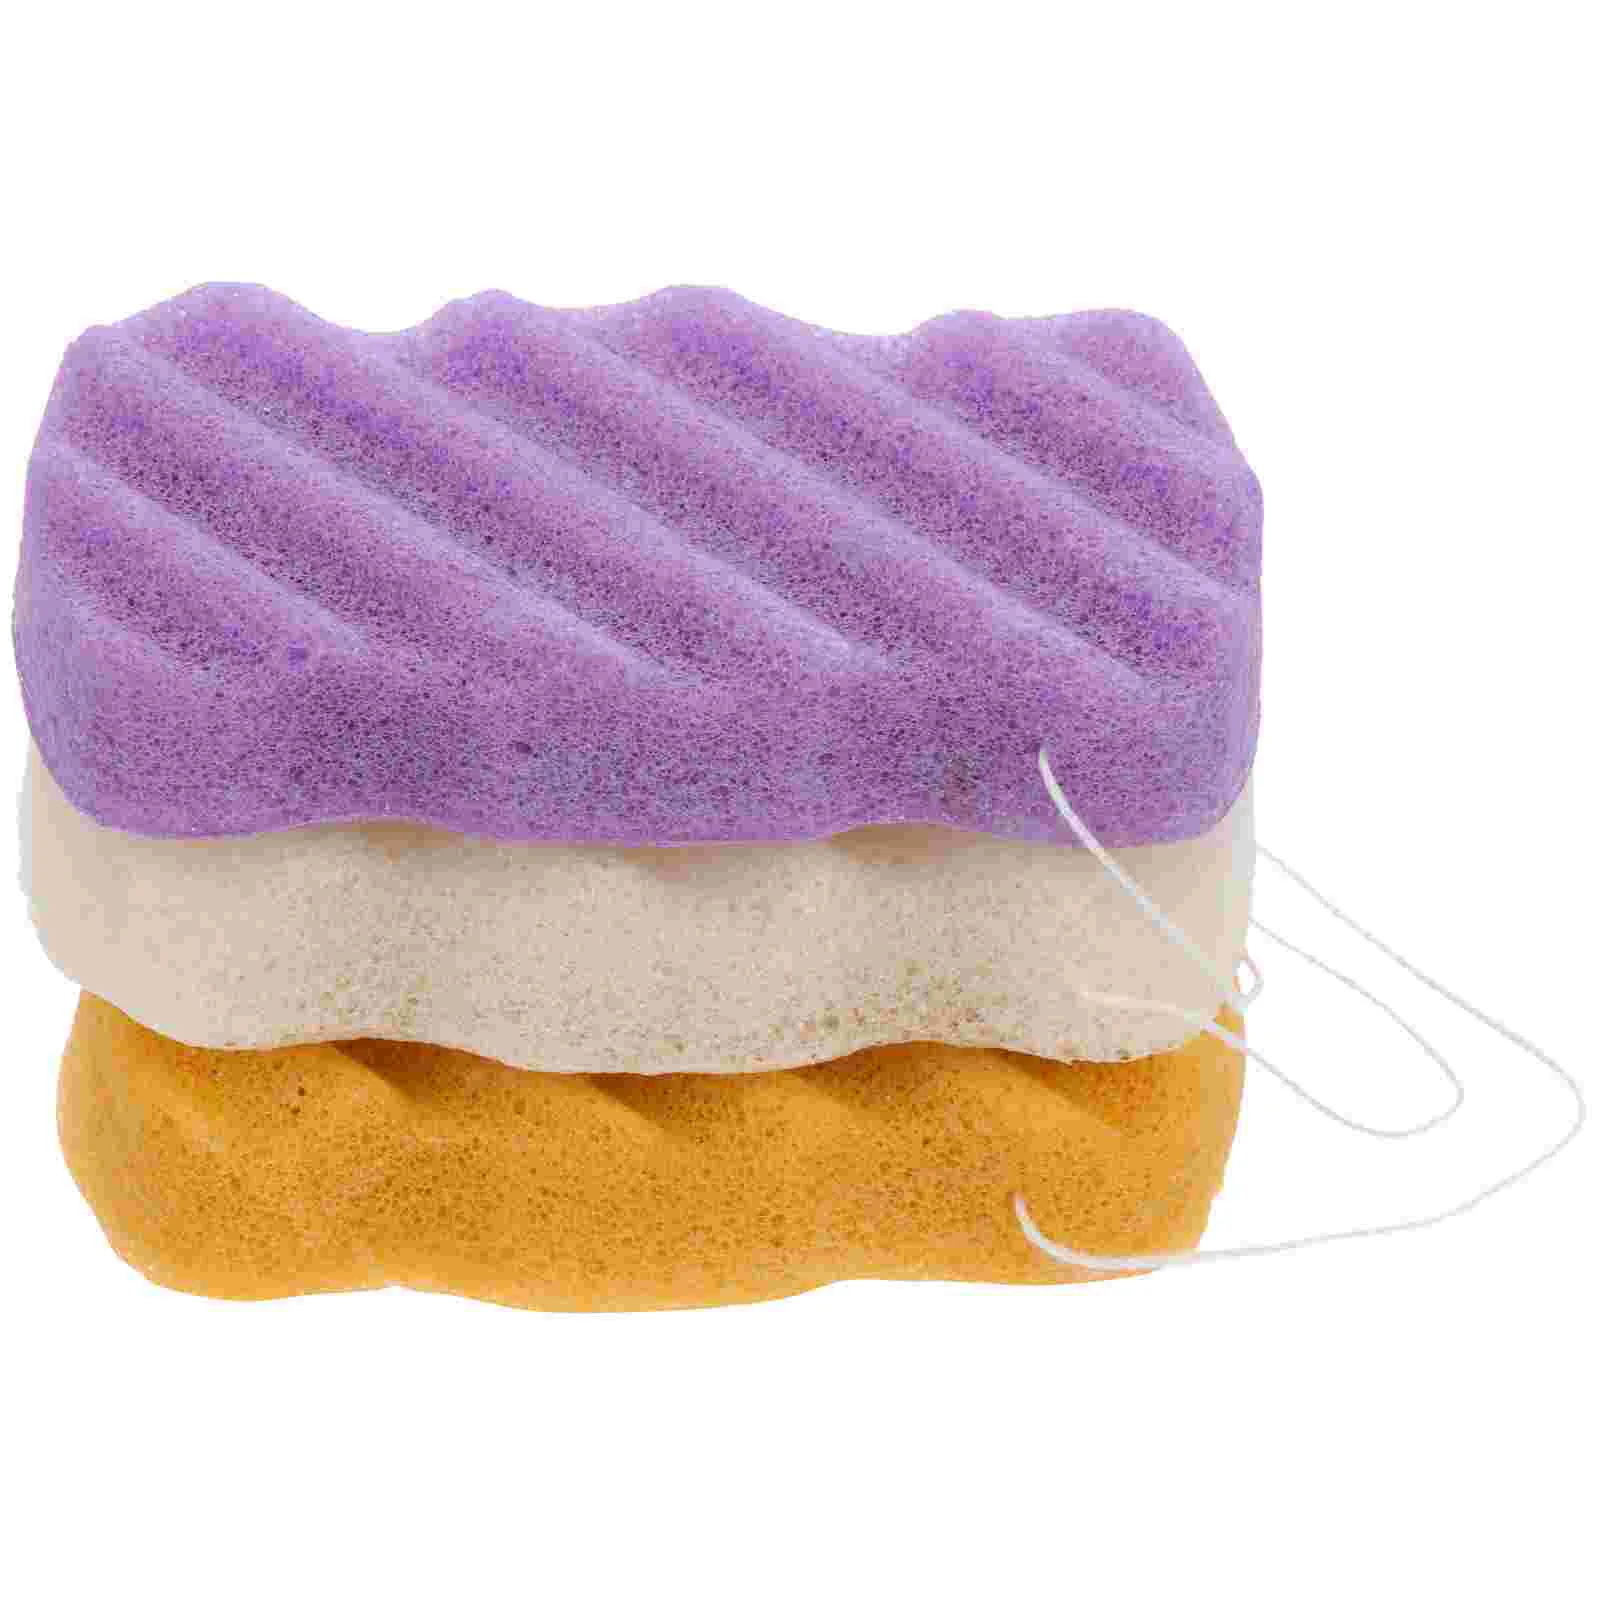 

Sponge Face Sponges Facial Makeup Konjac Cellulose Blending Wash Cleansing Spa Washing Removal Bath Baby Pads Exfoliating Puff